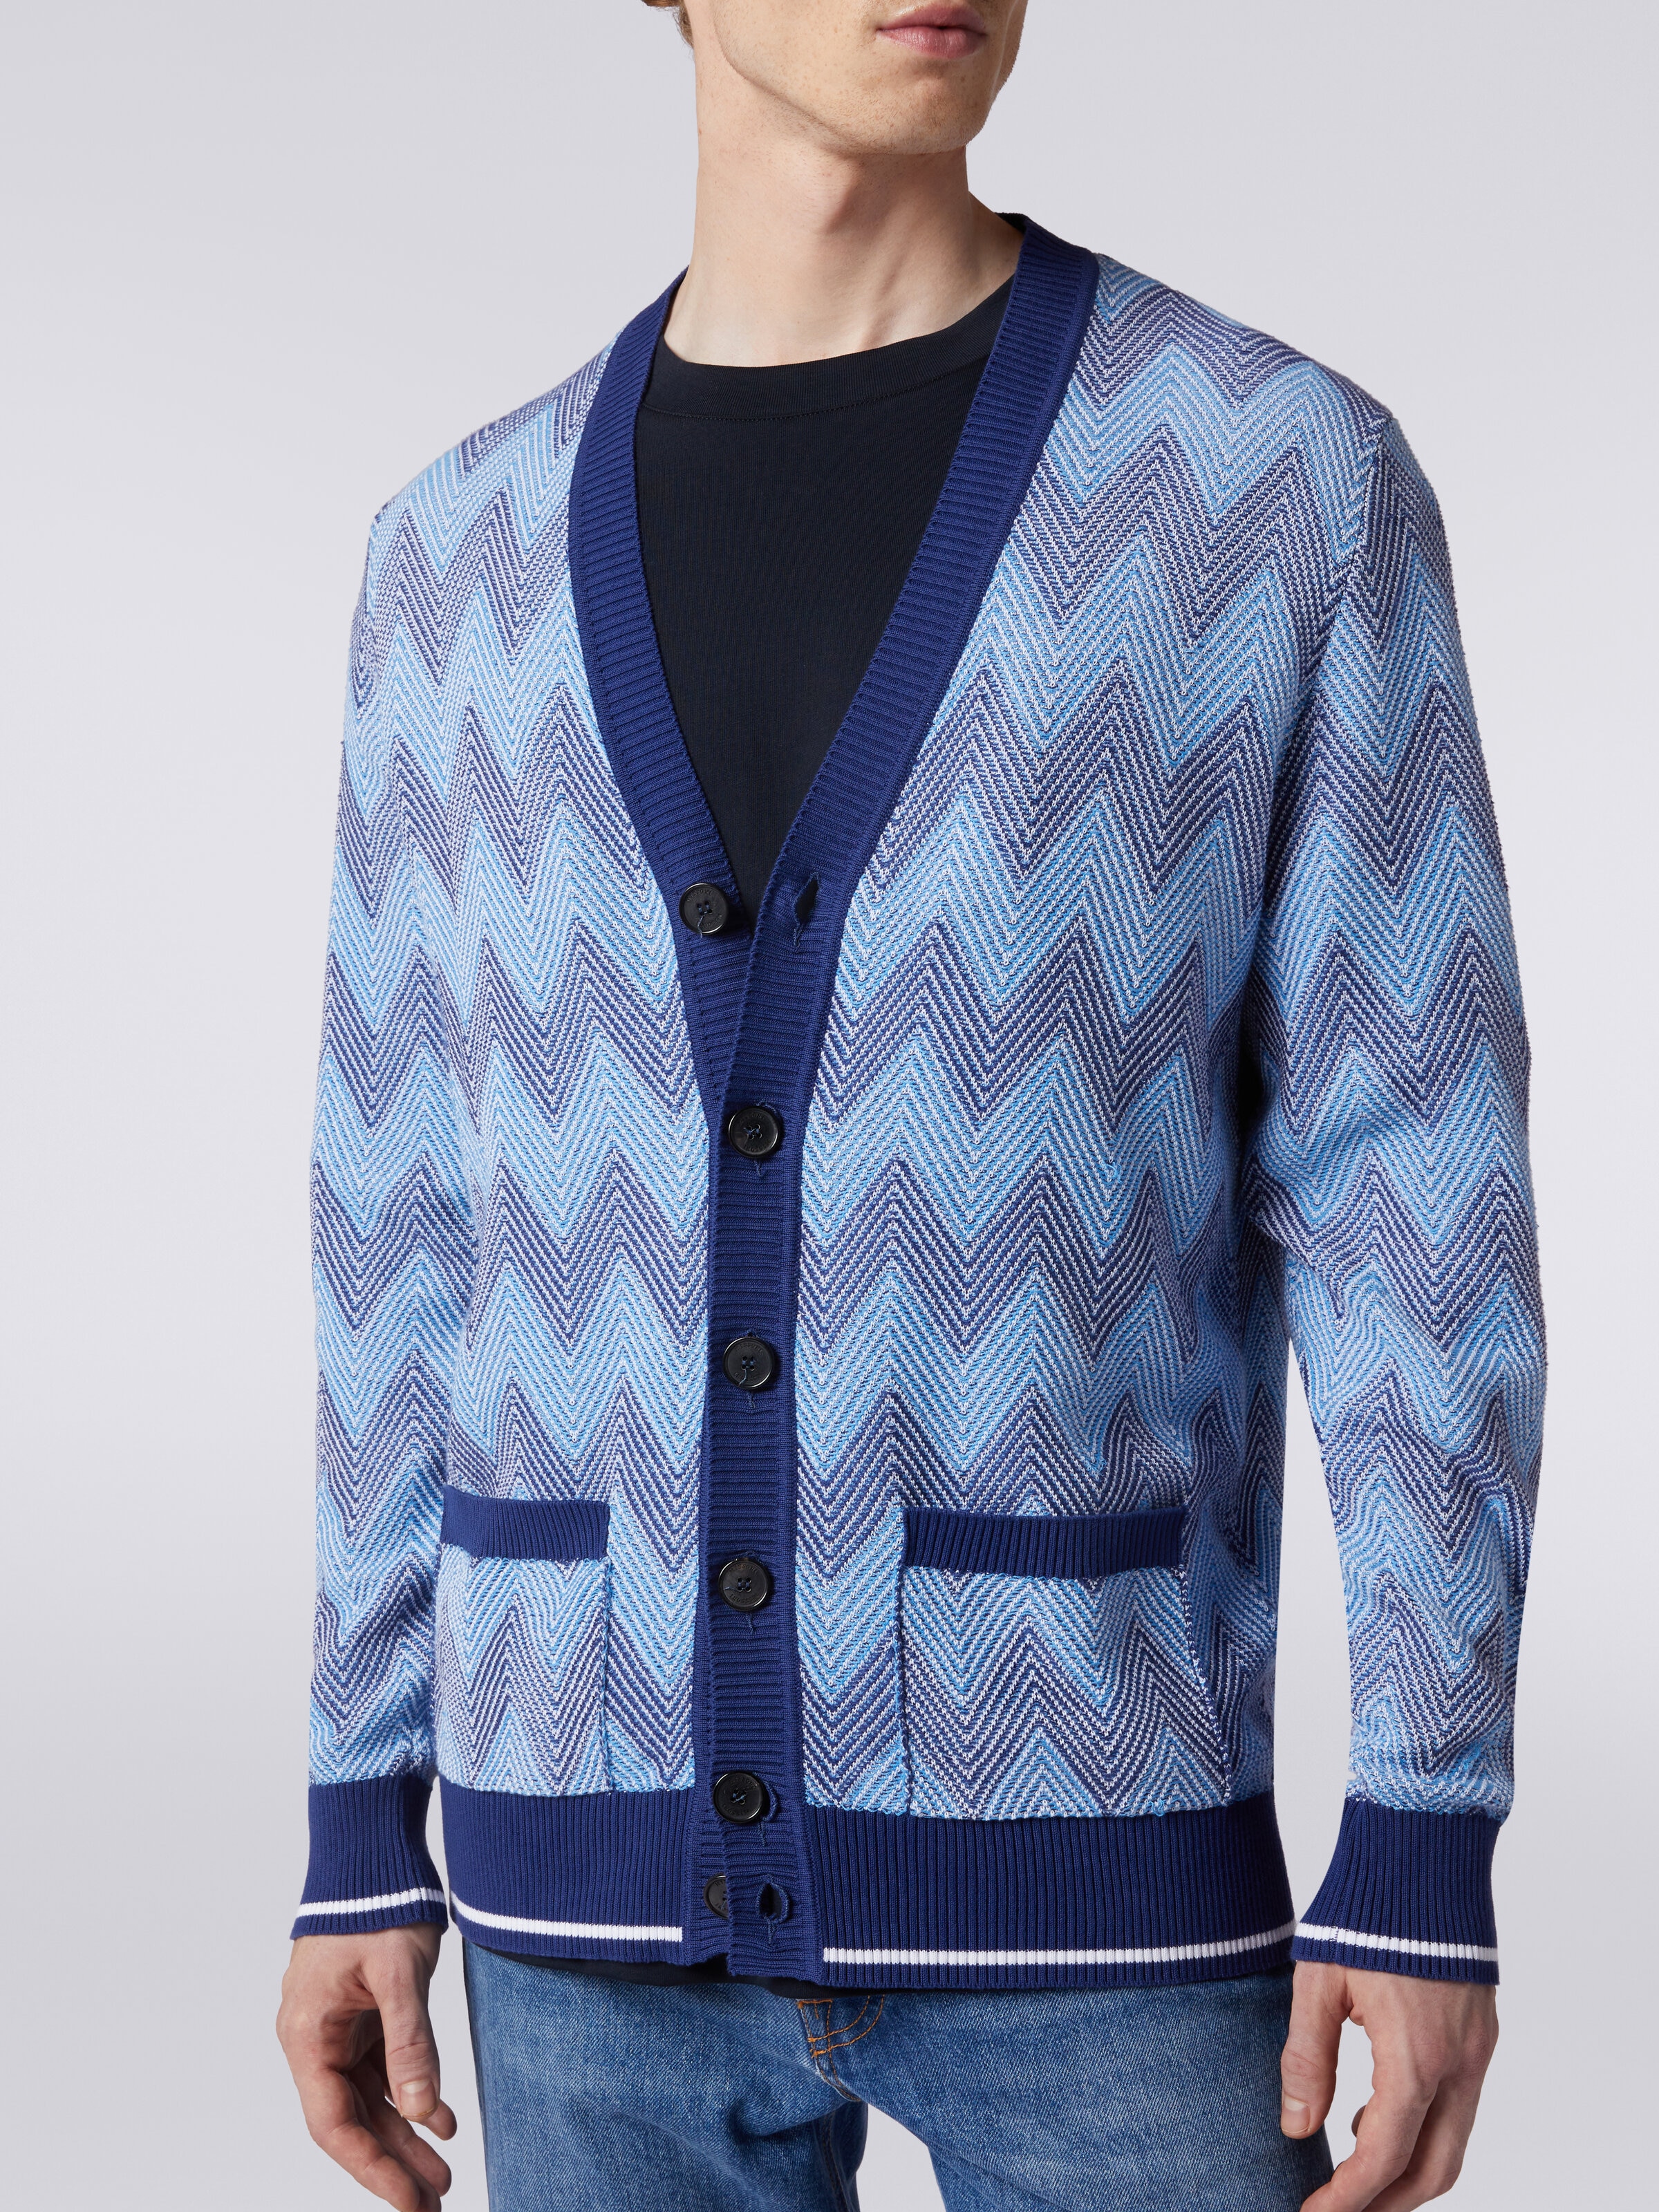 Cardigan in chevron cotton knit with contrasting trim, Blue - 4